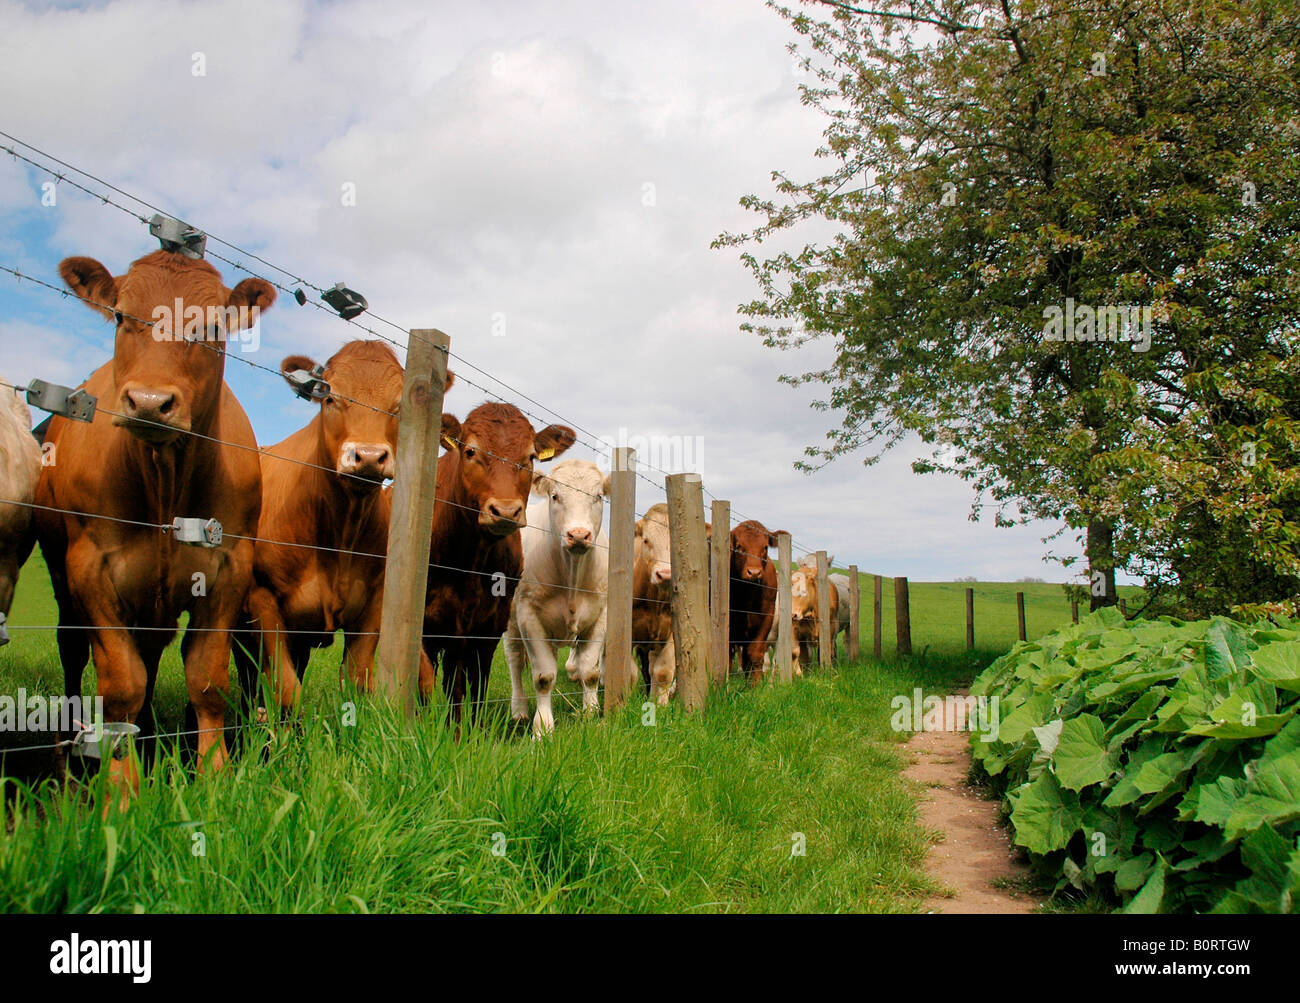 A herd of cows, lined up at a fence stare at the viewer. A footpath runs parallel to them. Stock Photo